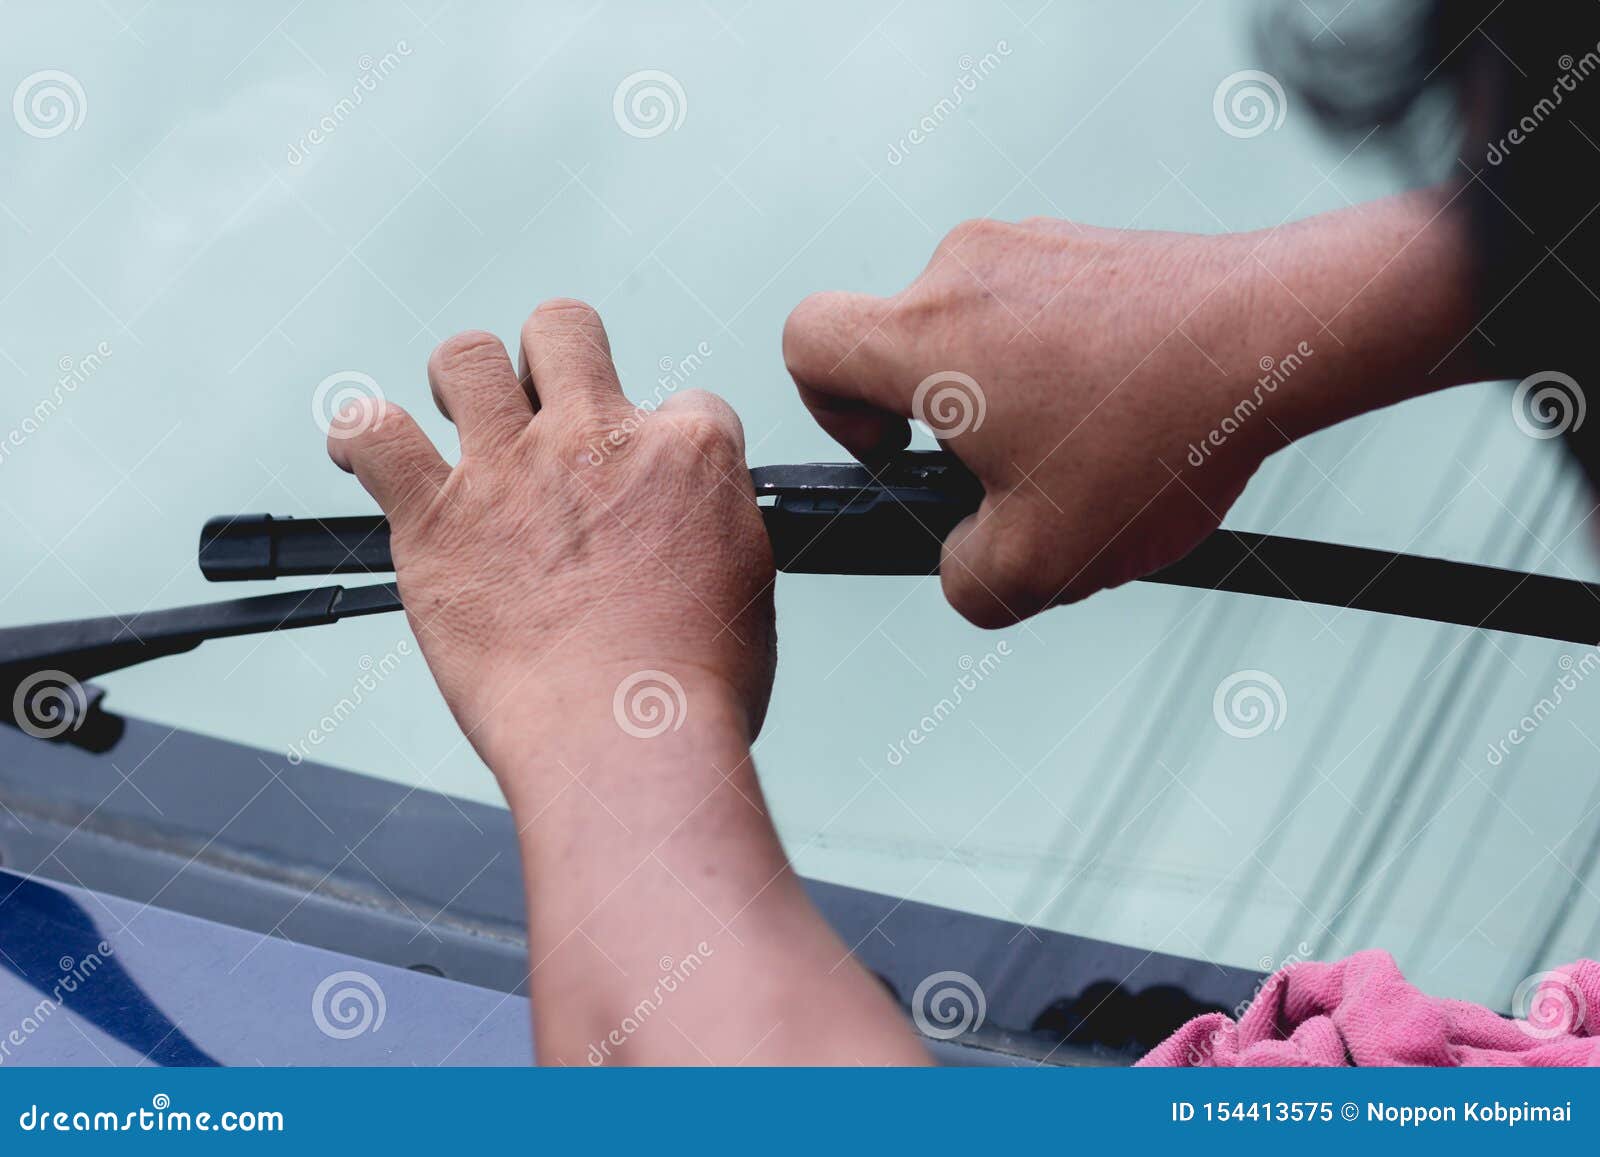 mechanic replace windshield wipers on car. replacing wiper blades